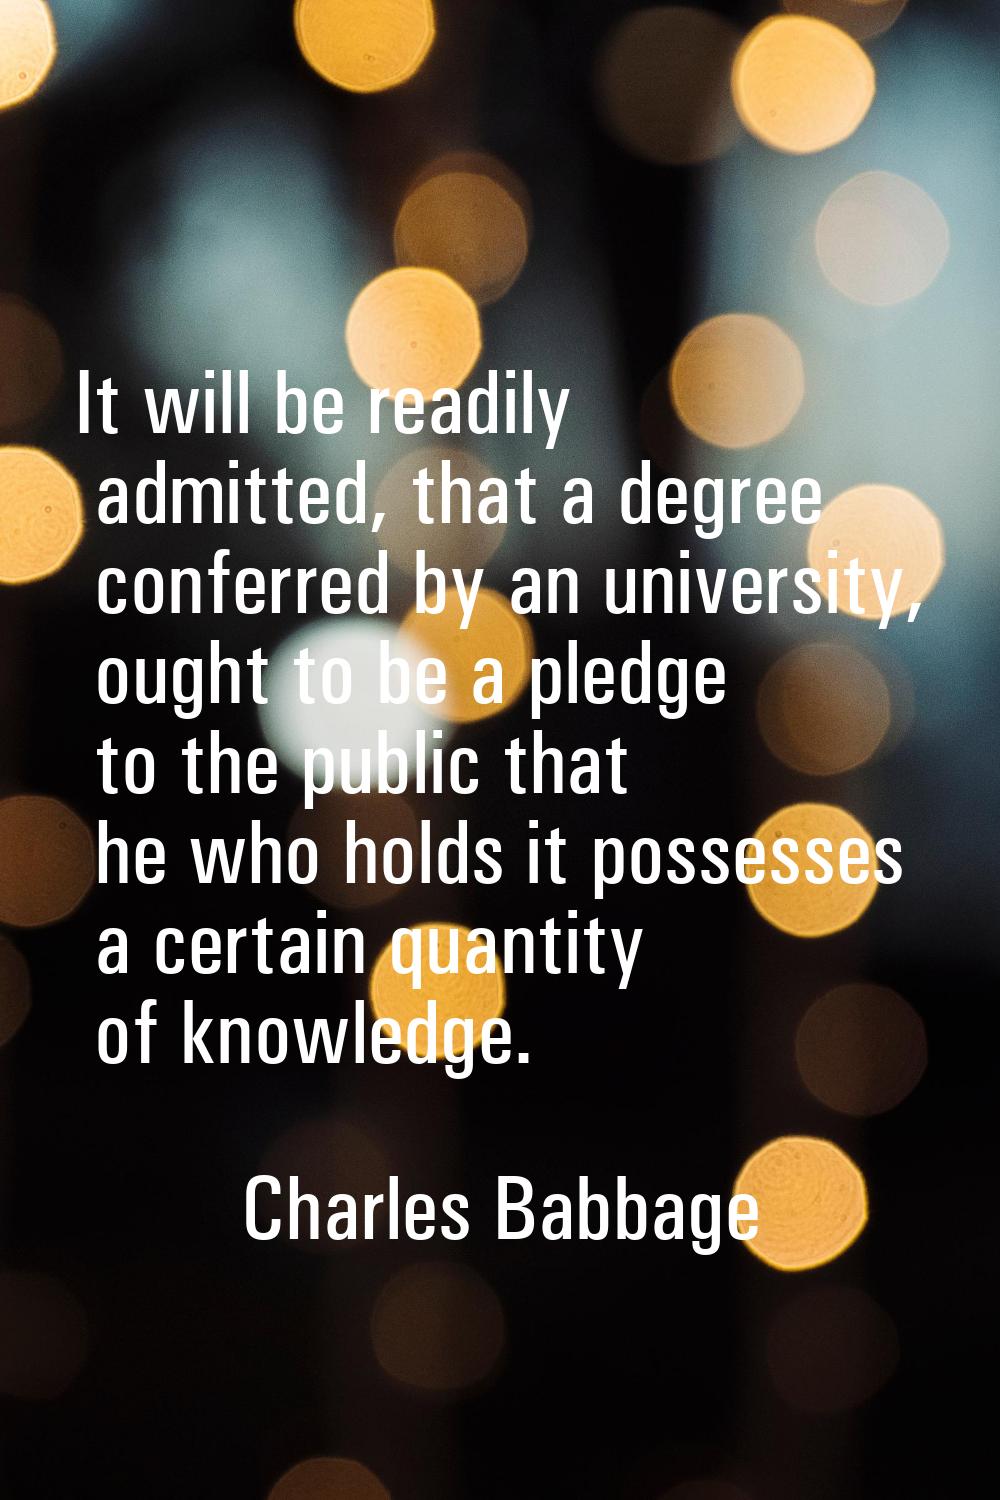 It will be readily admitted, that a degree conferred by an university, ought to be a pledge to the 